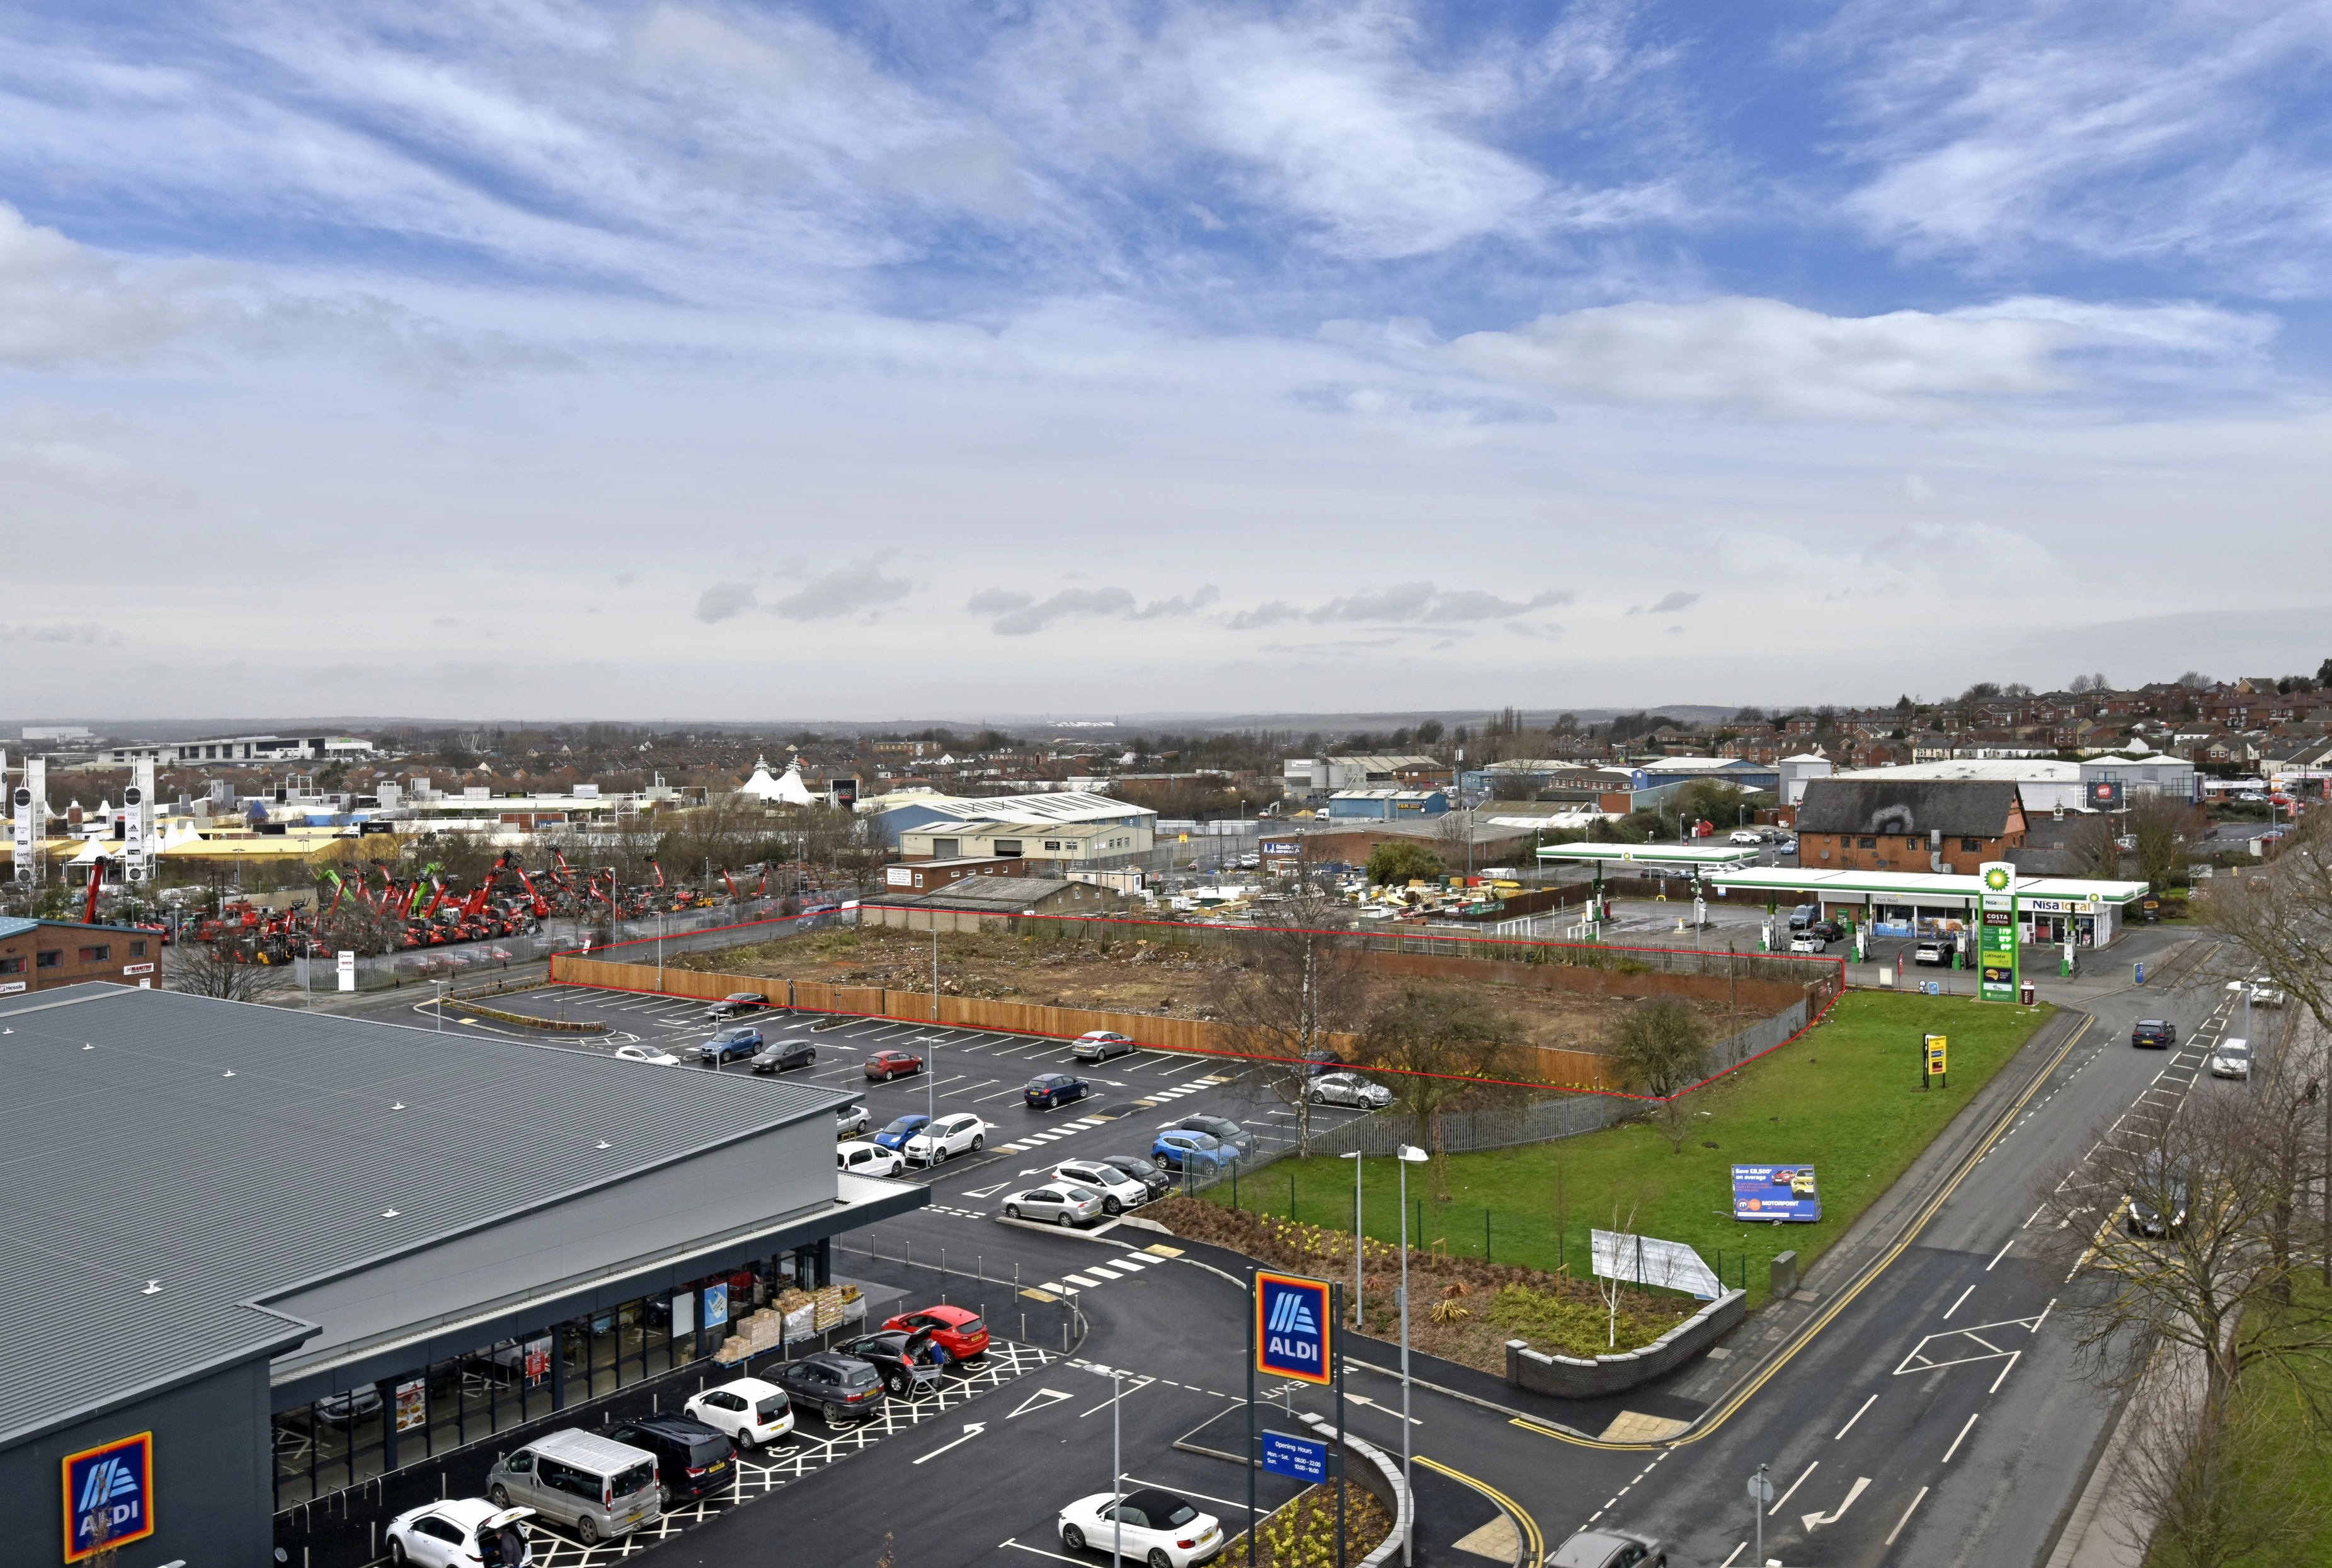 It is the latest in a series of West Yorkshire property acquisitions for Eshton